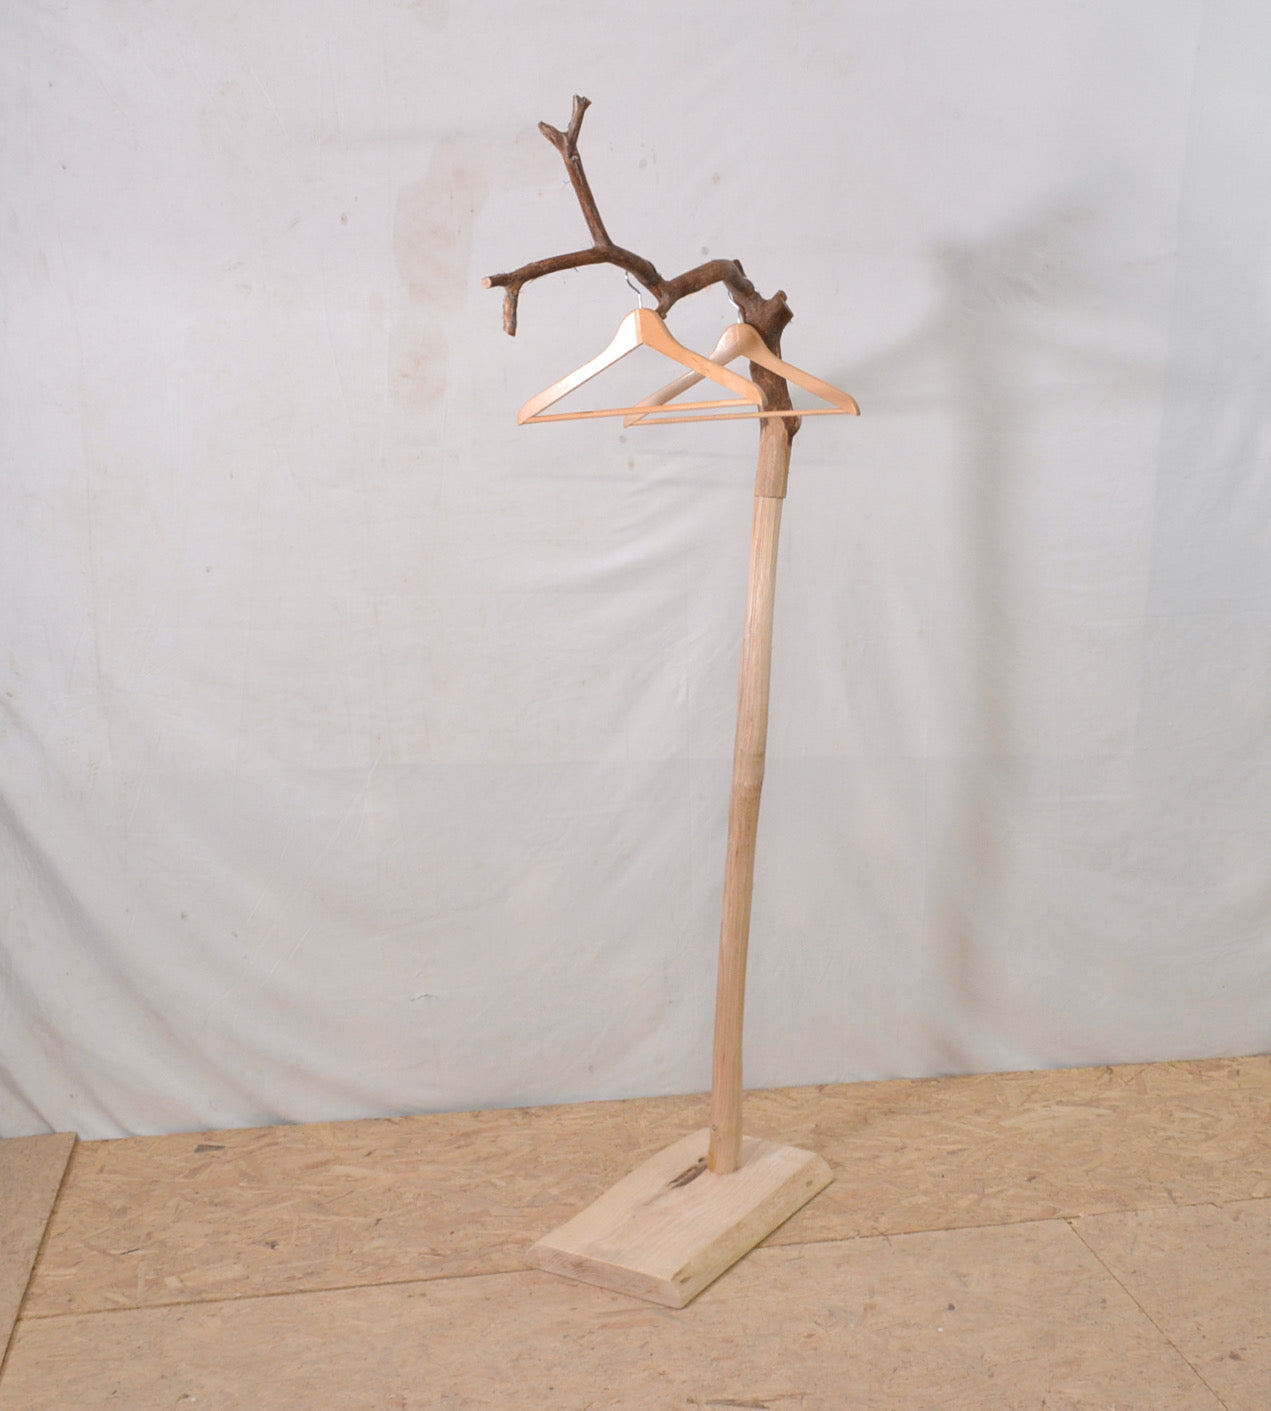 Original Valet Stand, Wooden clothes hanger with a oak branch,